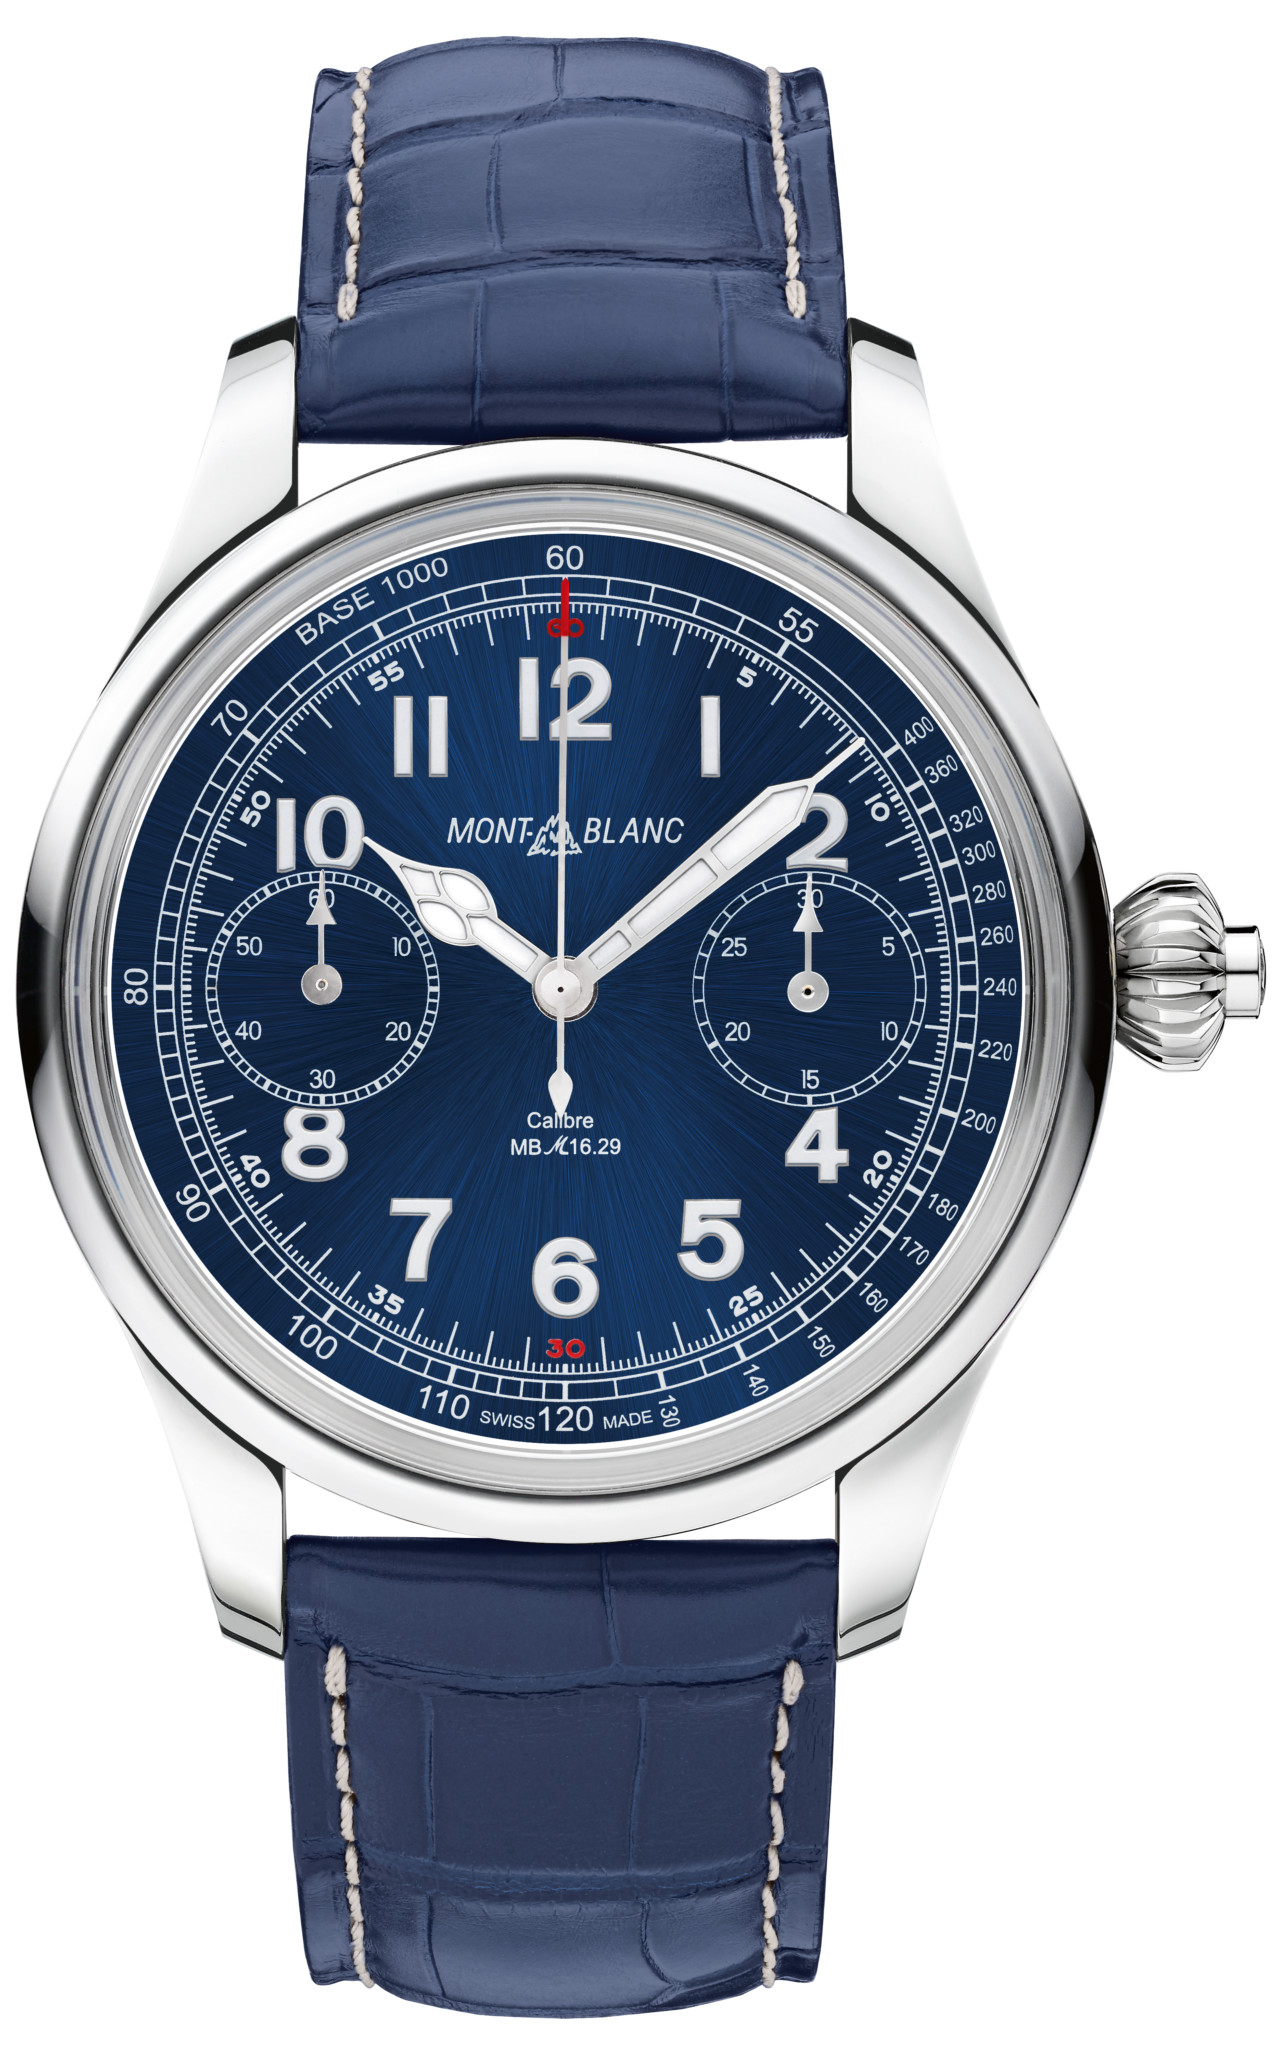 Montblanc-1858-chronograph-tachymeter-limited-edition-front